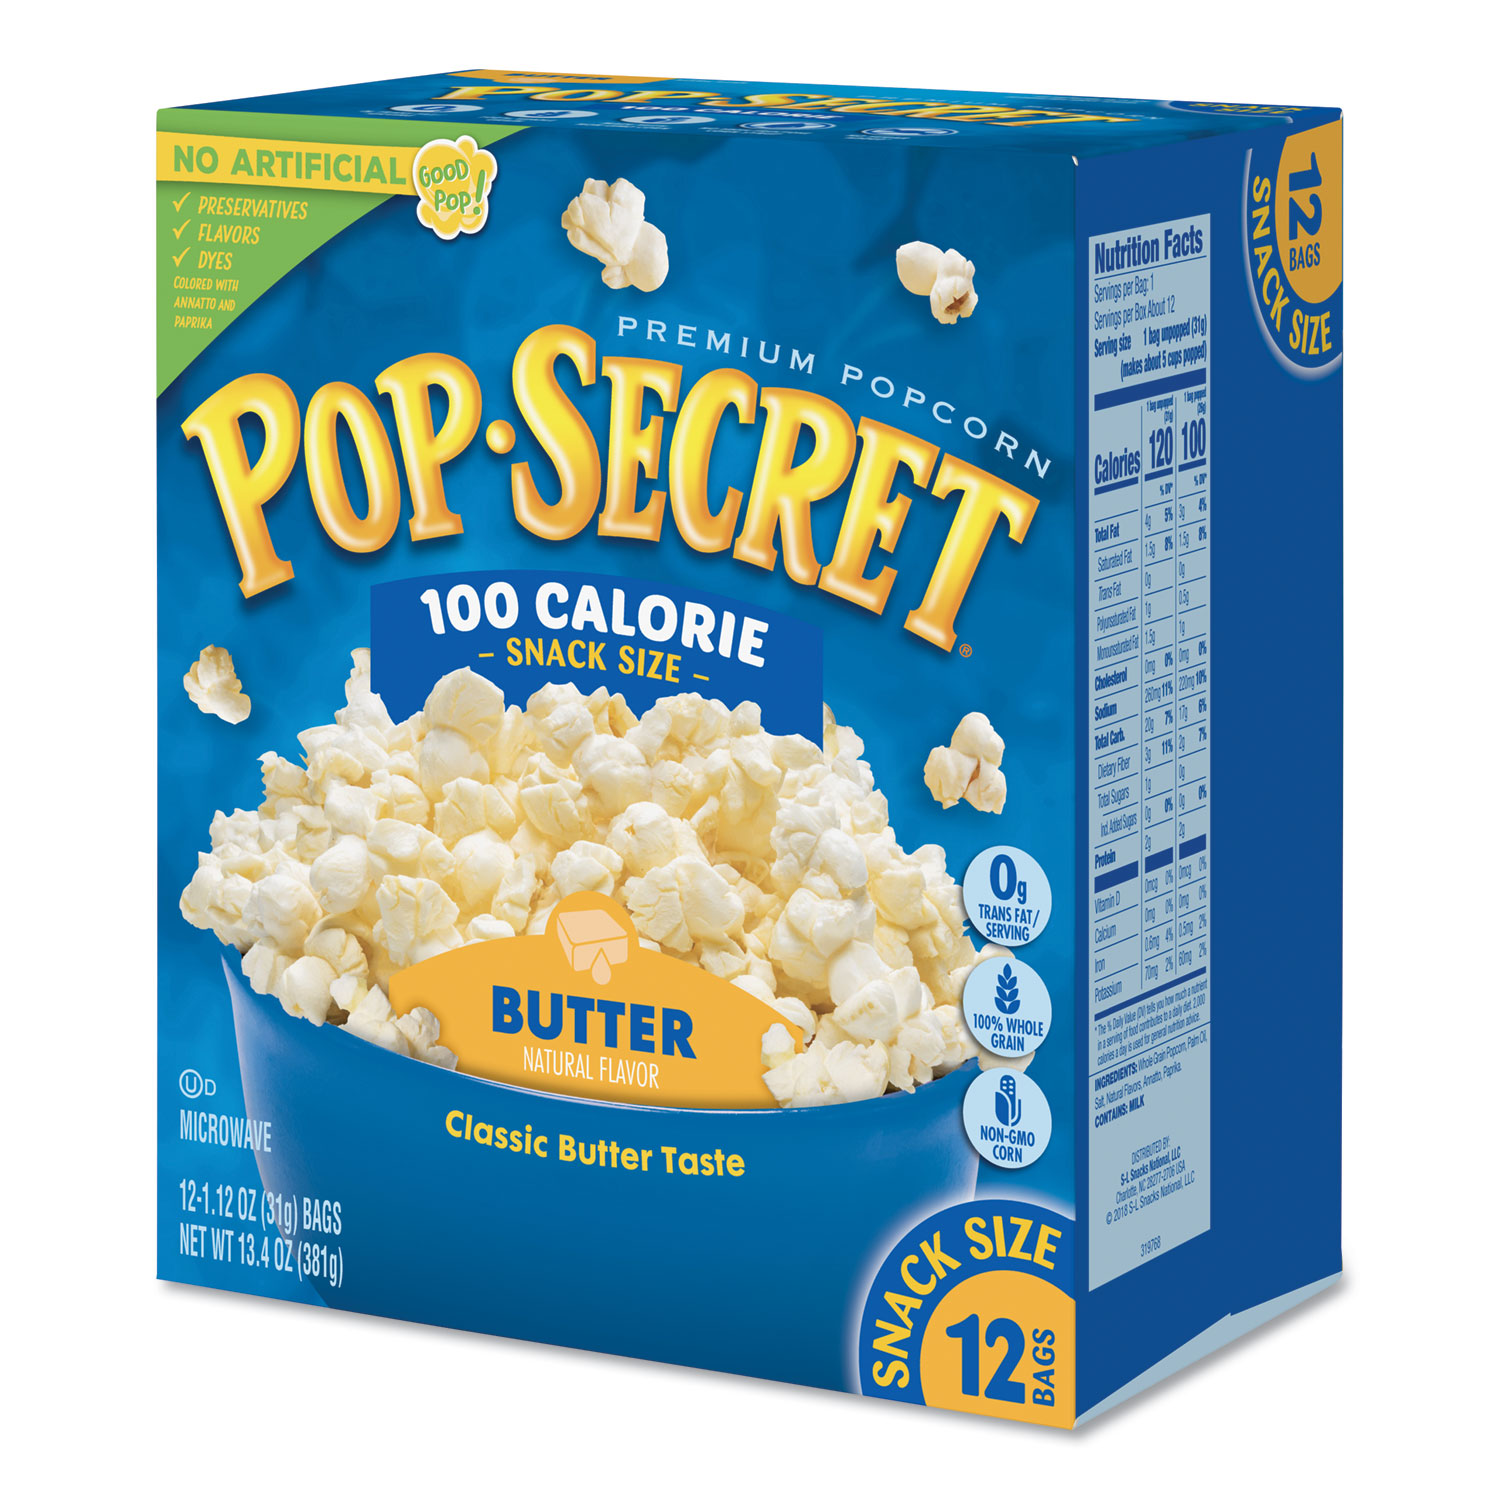 Microwave Popcorn, Butter, 1.2 oz Bags, 12/Box